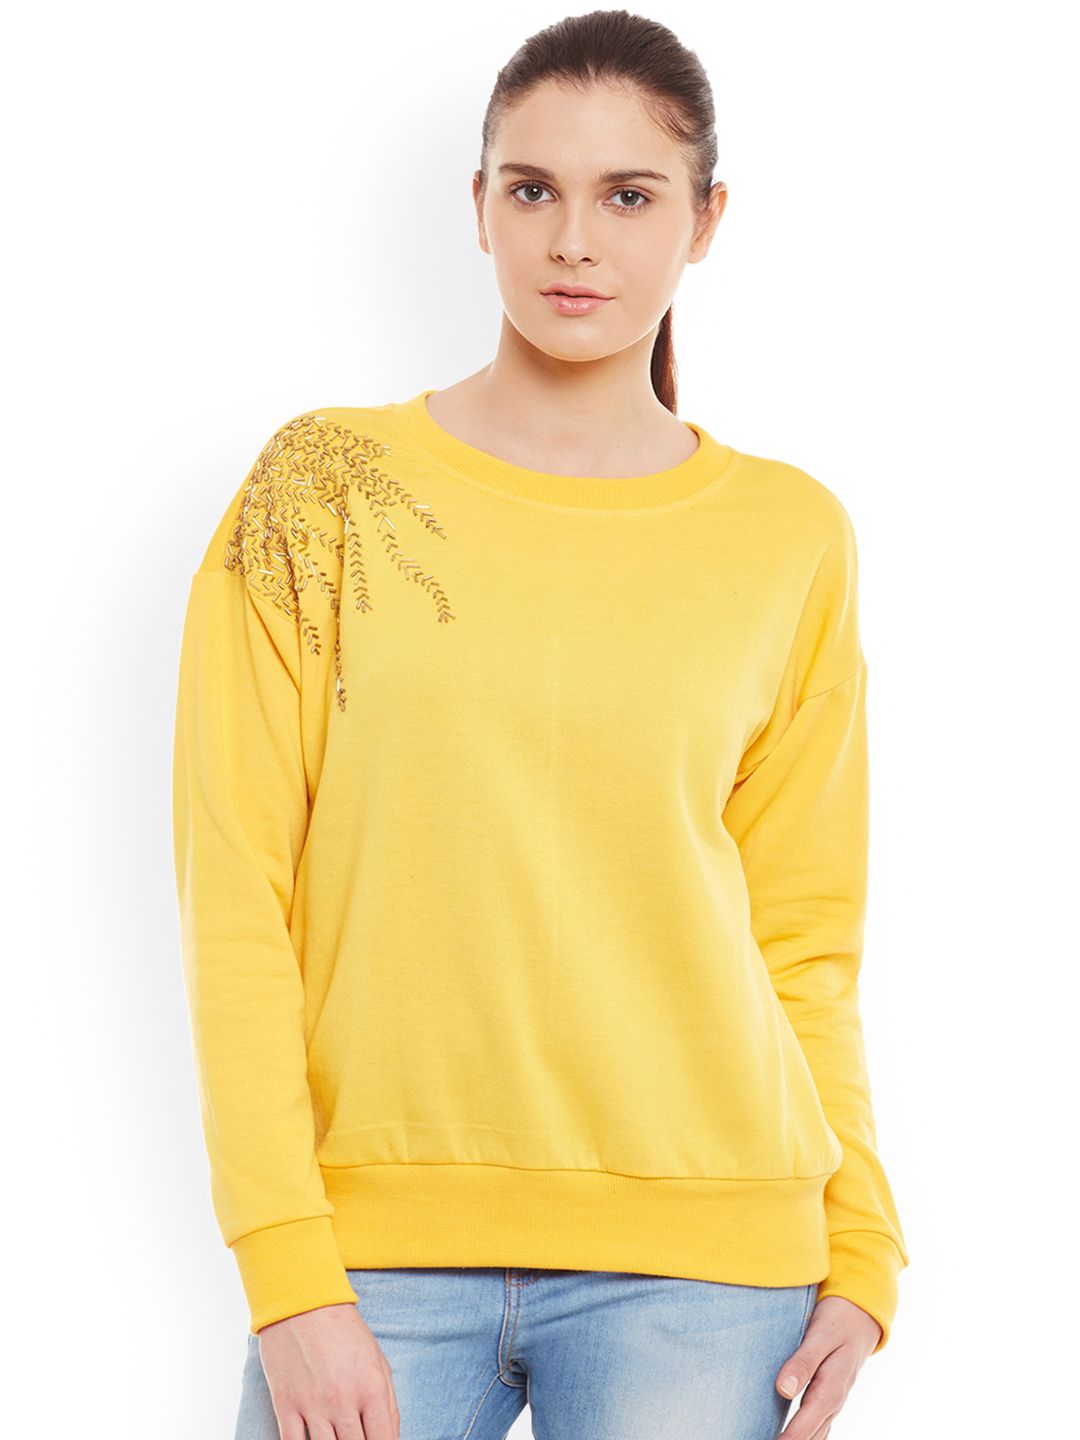 Belle Fille Yellow Sweatshirt with Embellished Detail Price in India